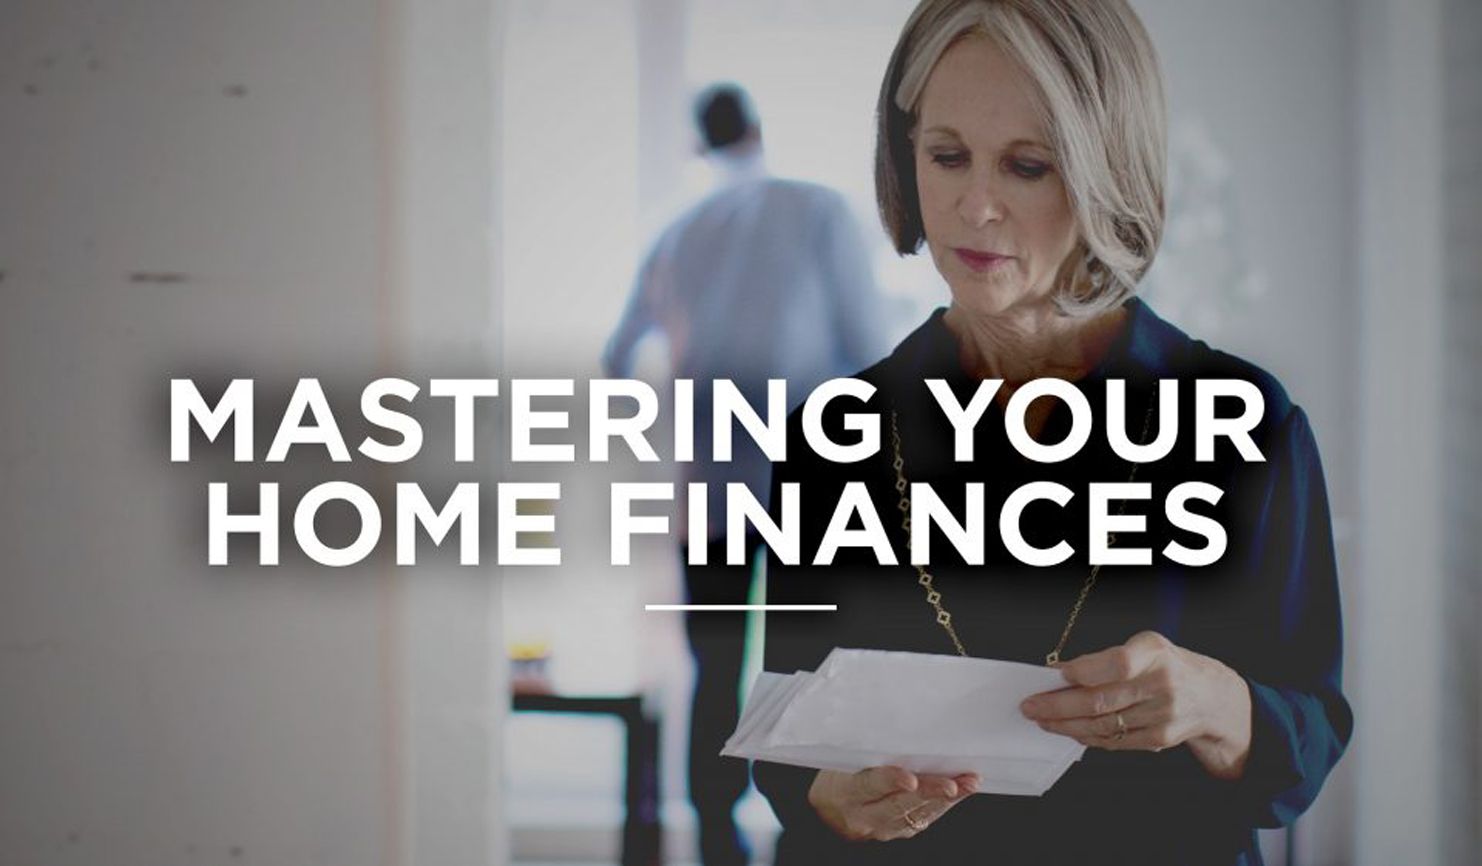 How to Master Your Home Finances | Guideposts